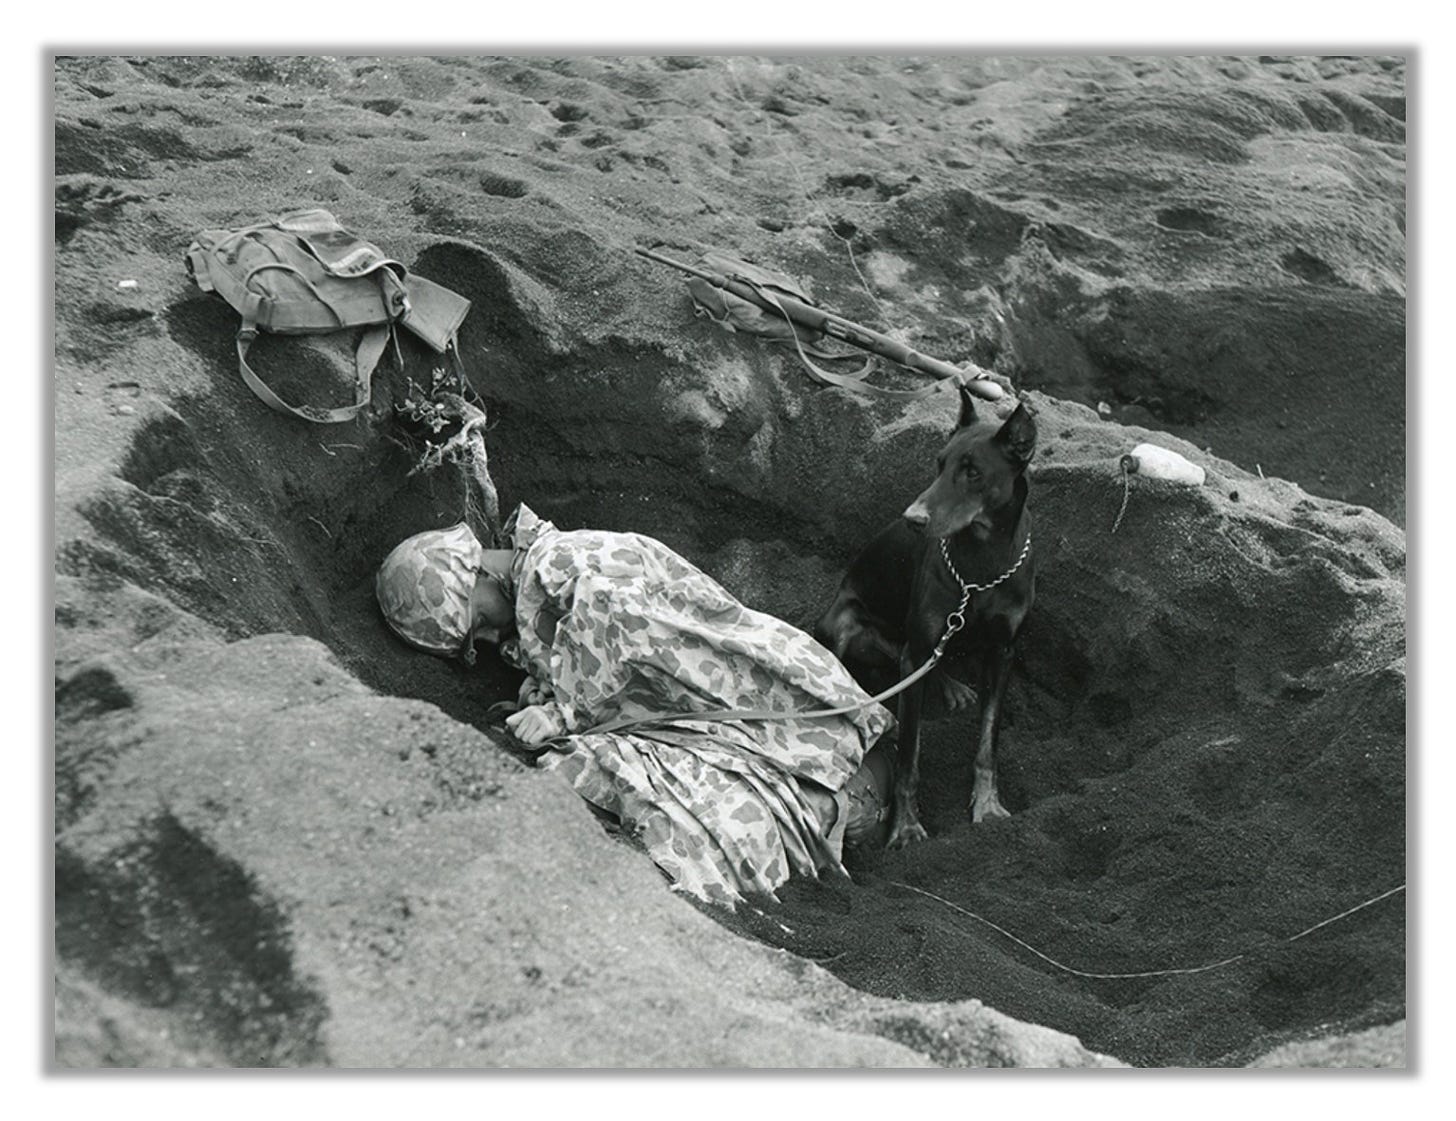 PFC Rez P Hester takes a nap in a foxhole while his dog Butch stands guard.